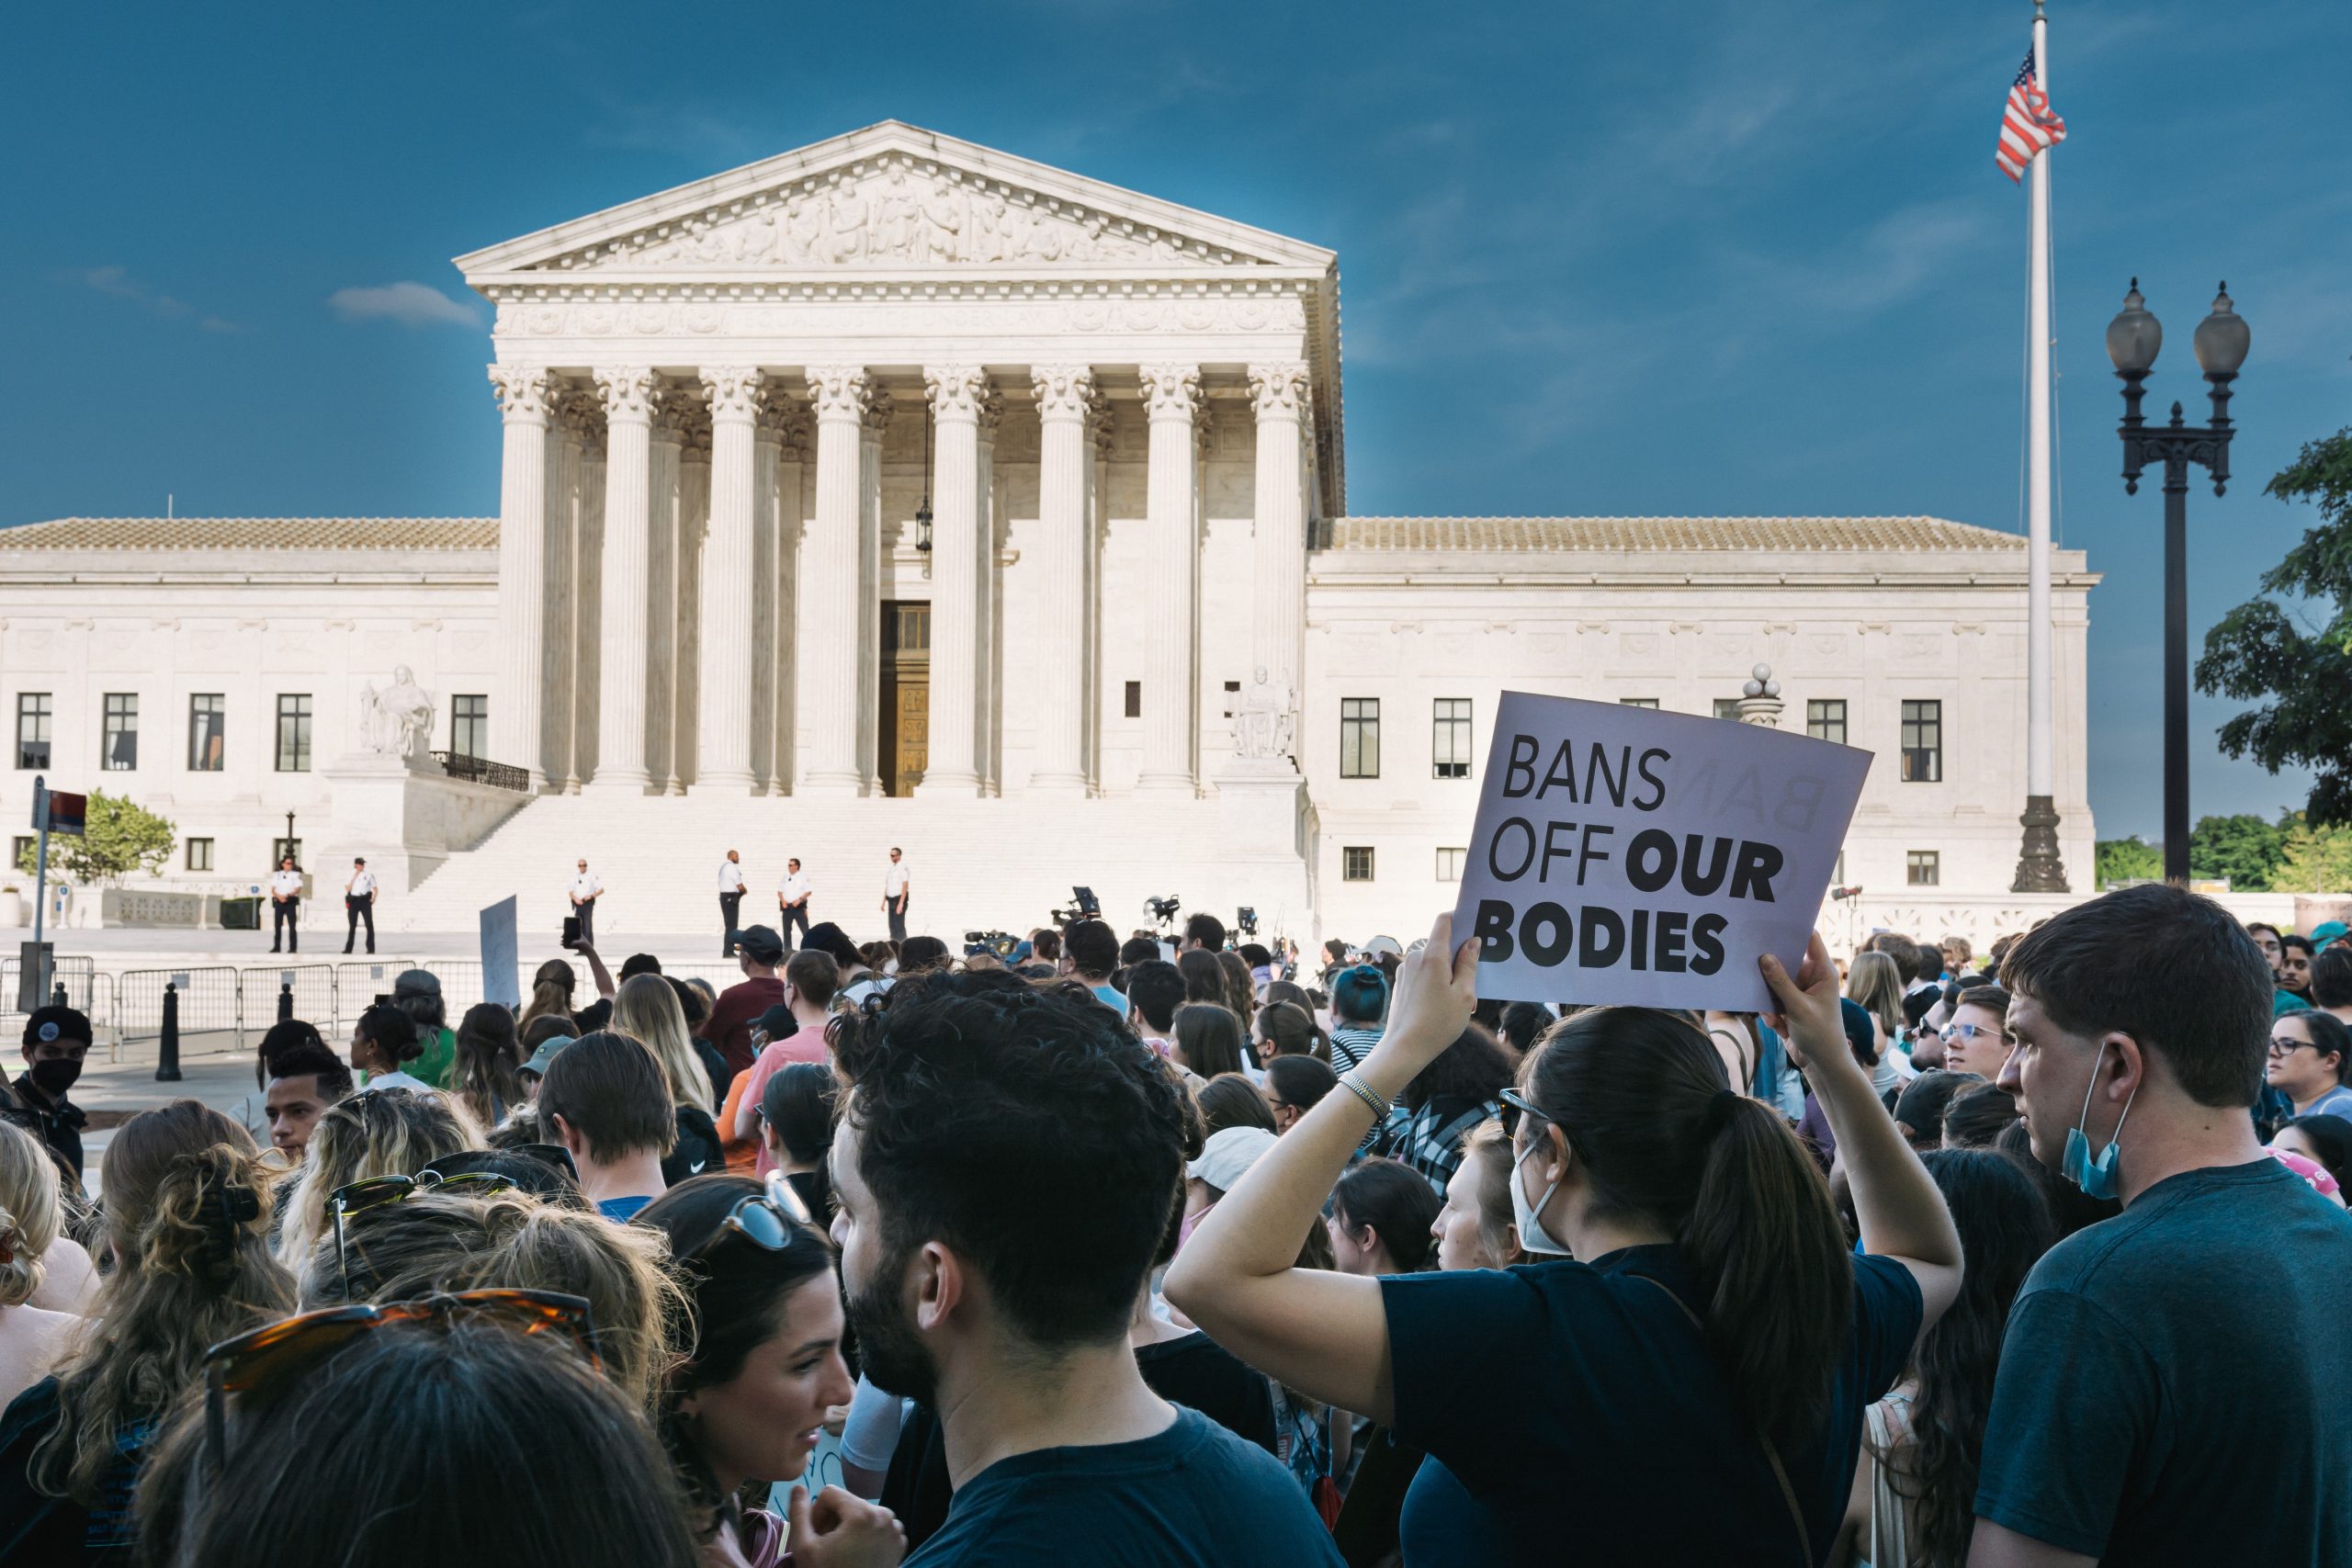 One year later: Reflections following the overturn of Roe v. Wade